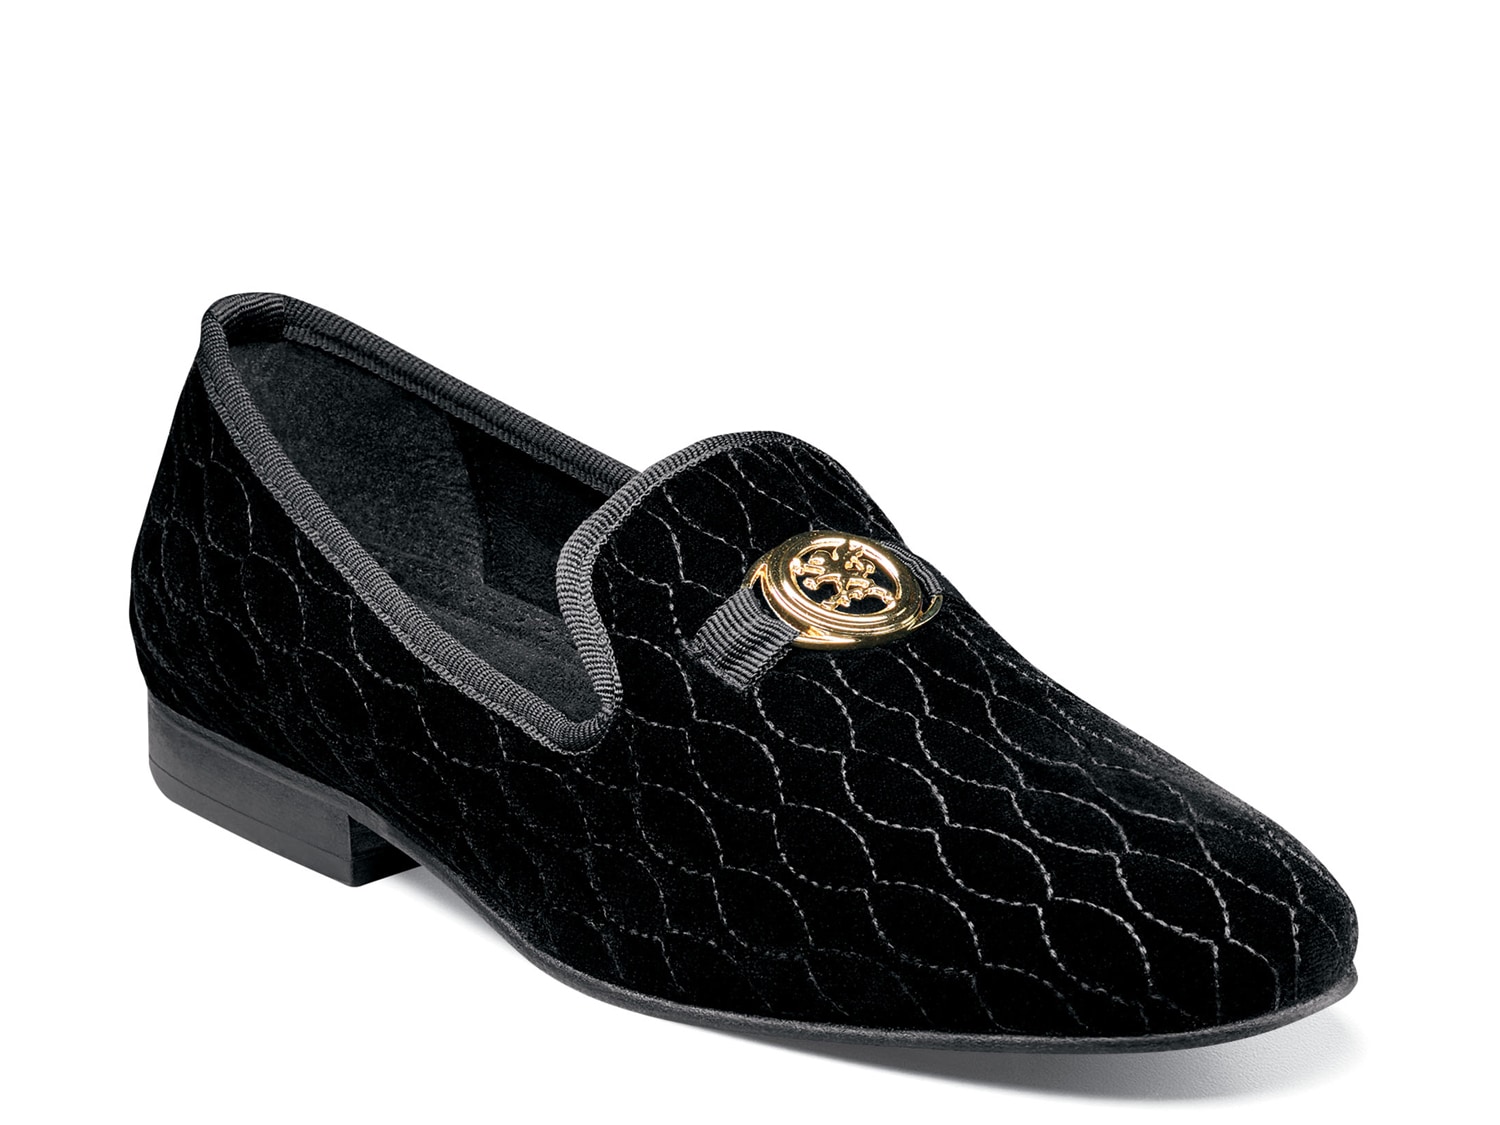 mens loafers dsw